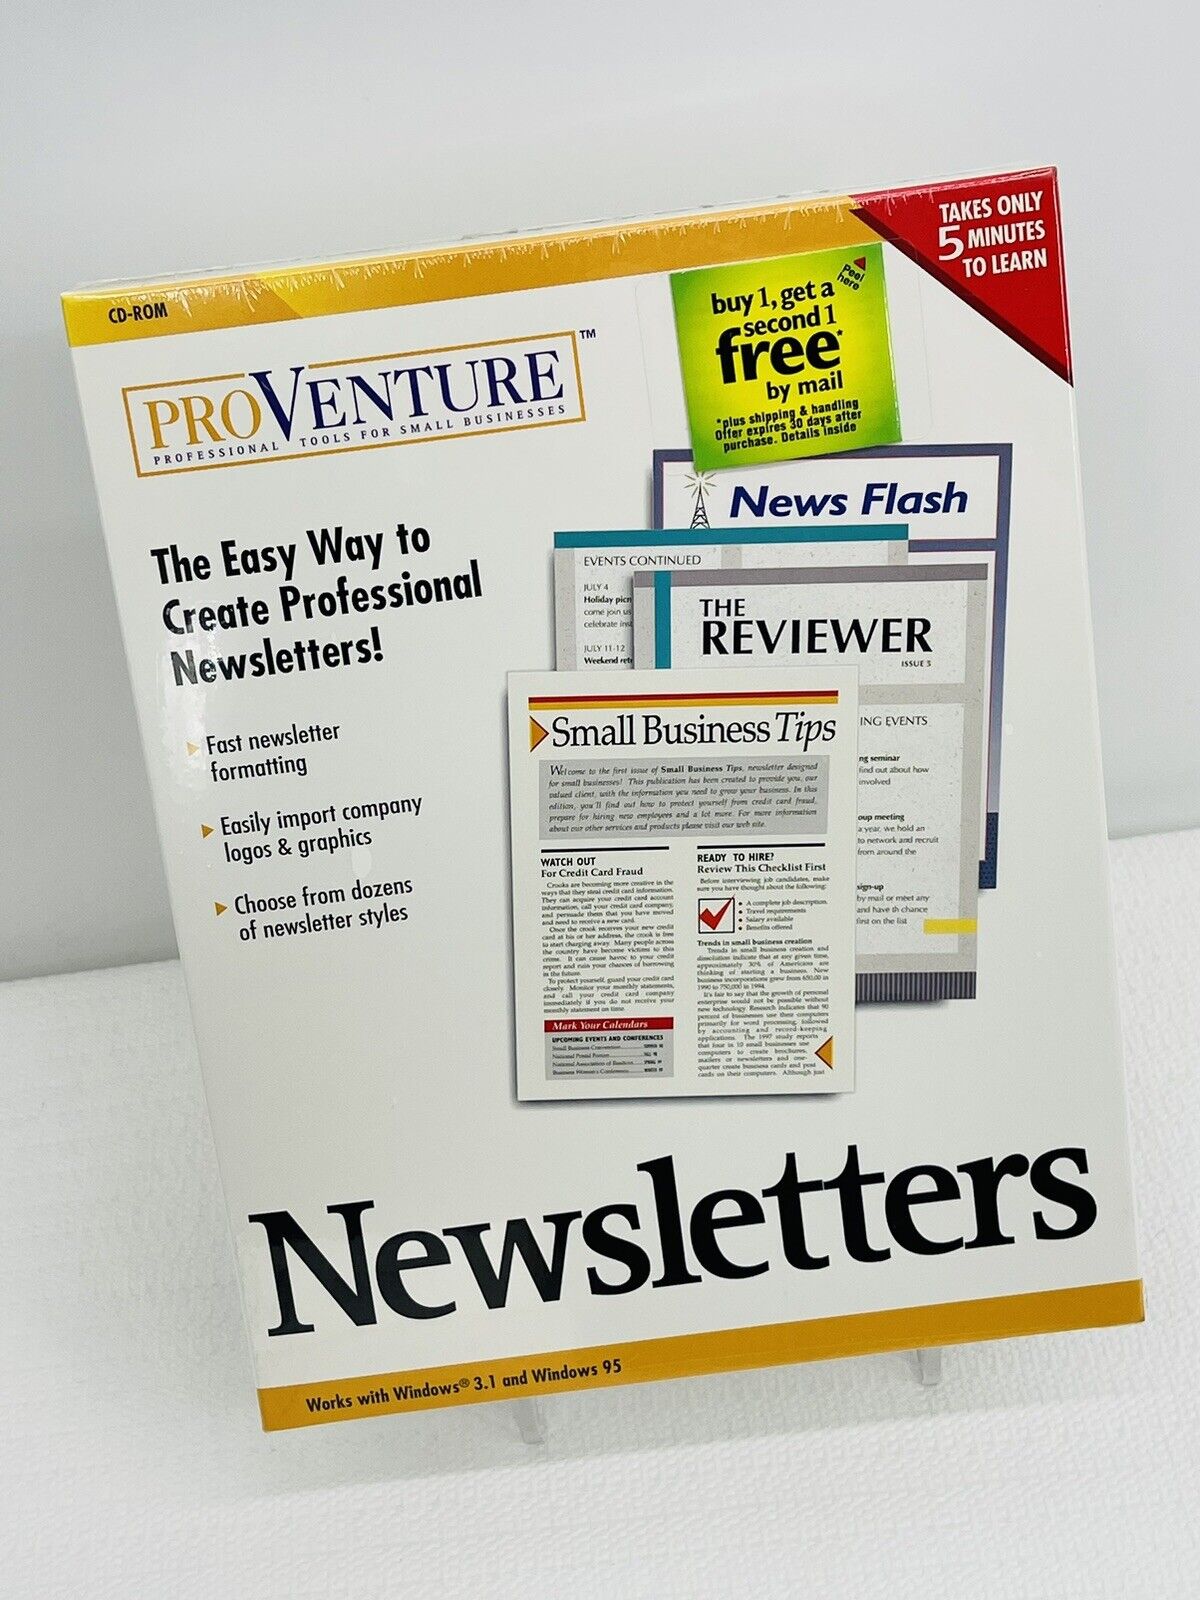 PROVENTURE NEWSLETTERS (1998) Quick Learn CD-ROM Windows 3.1 or 95